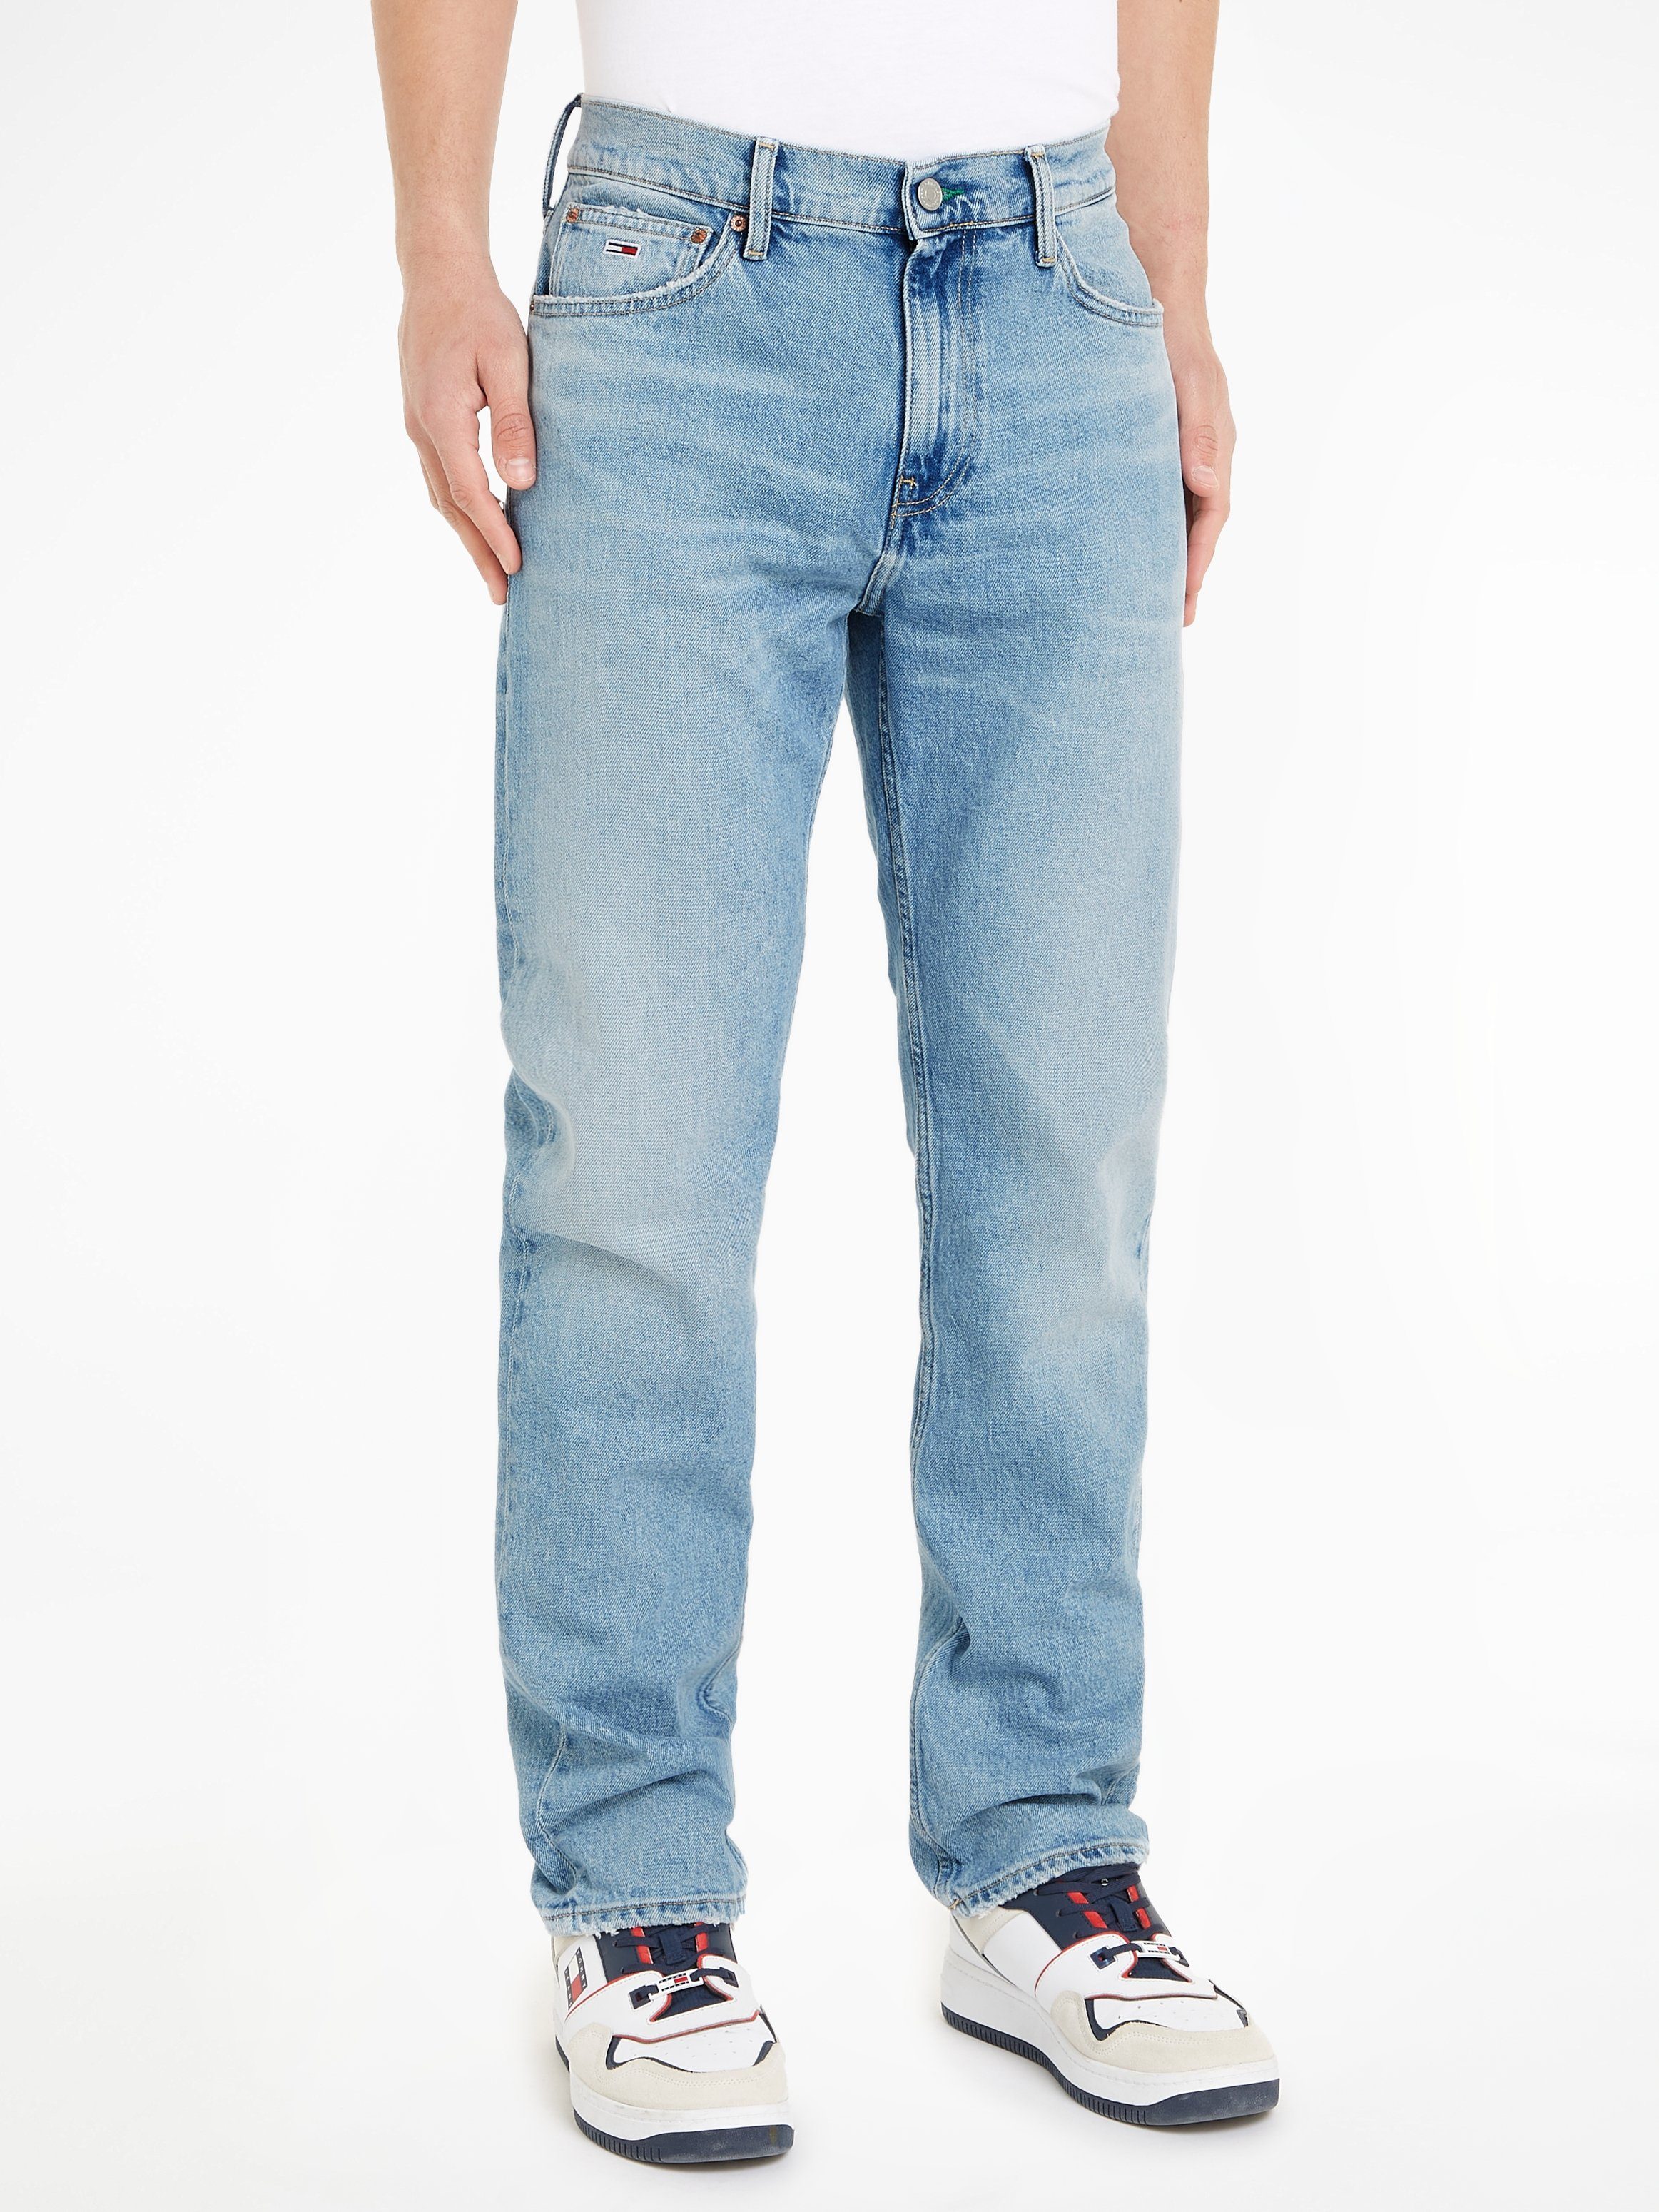 Tommy Jeans Relax-fit-Jeans ETHAN RLXD STRGHT im 5-Pocket-Style Denim Light